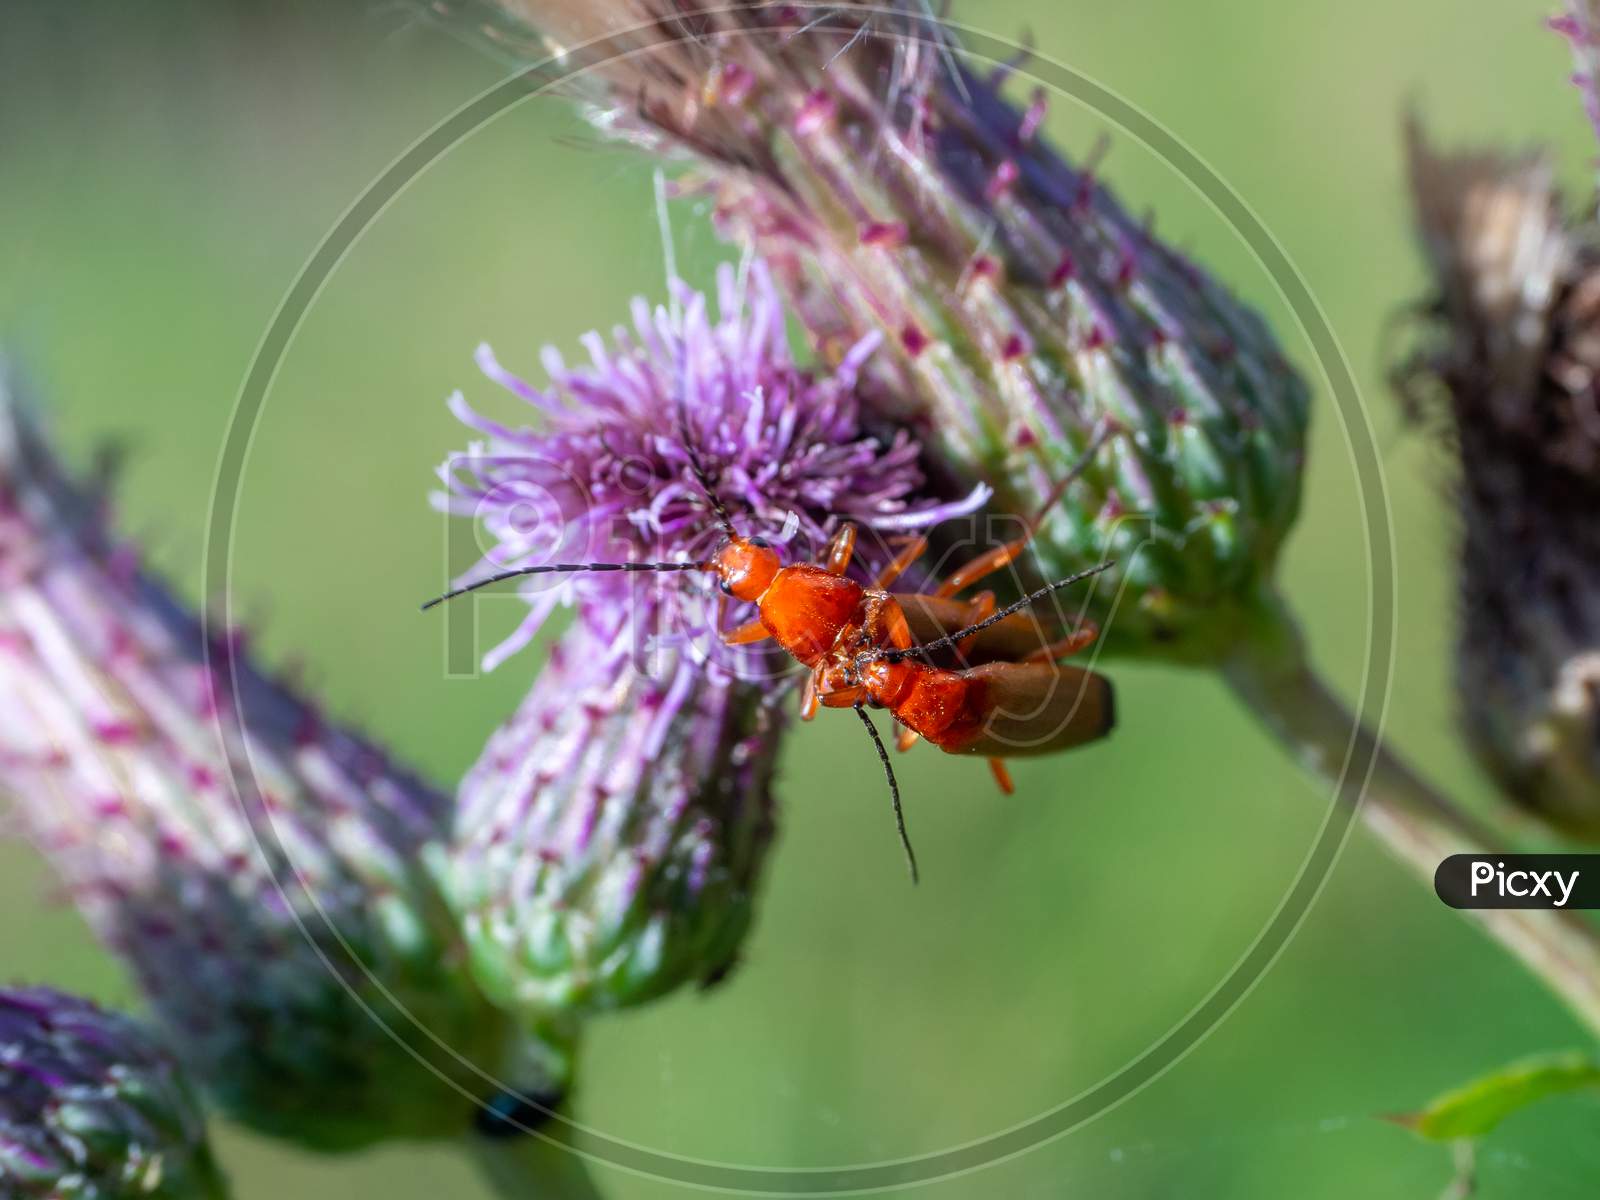 The Common Red Soldier Beetles On The Blooming Purple Flower Of Scotch Thistle (Cirsium Vulgare) Close-Up Of Rhagonycha Fulva Reproducing During Spring.